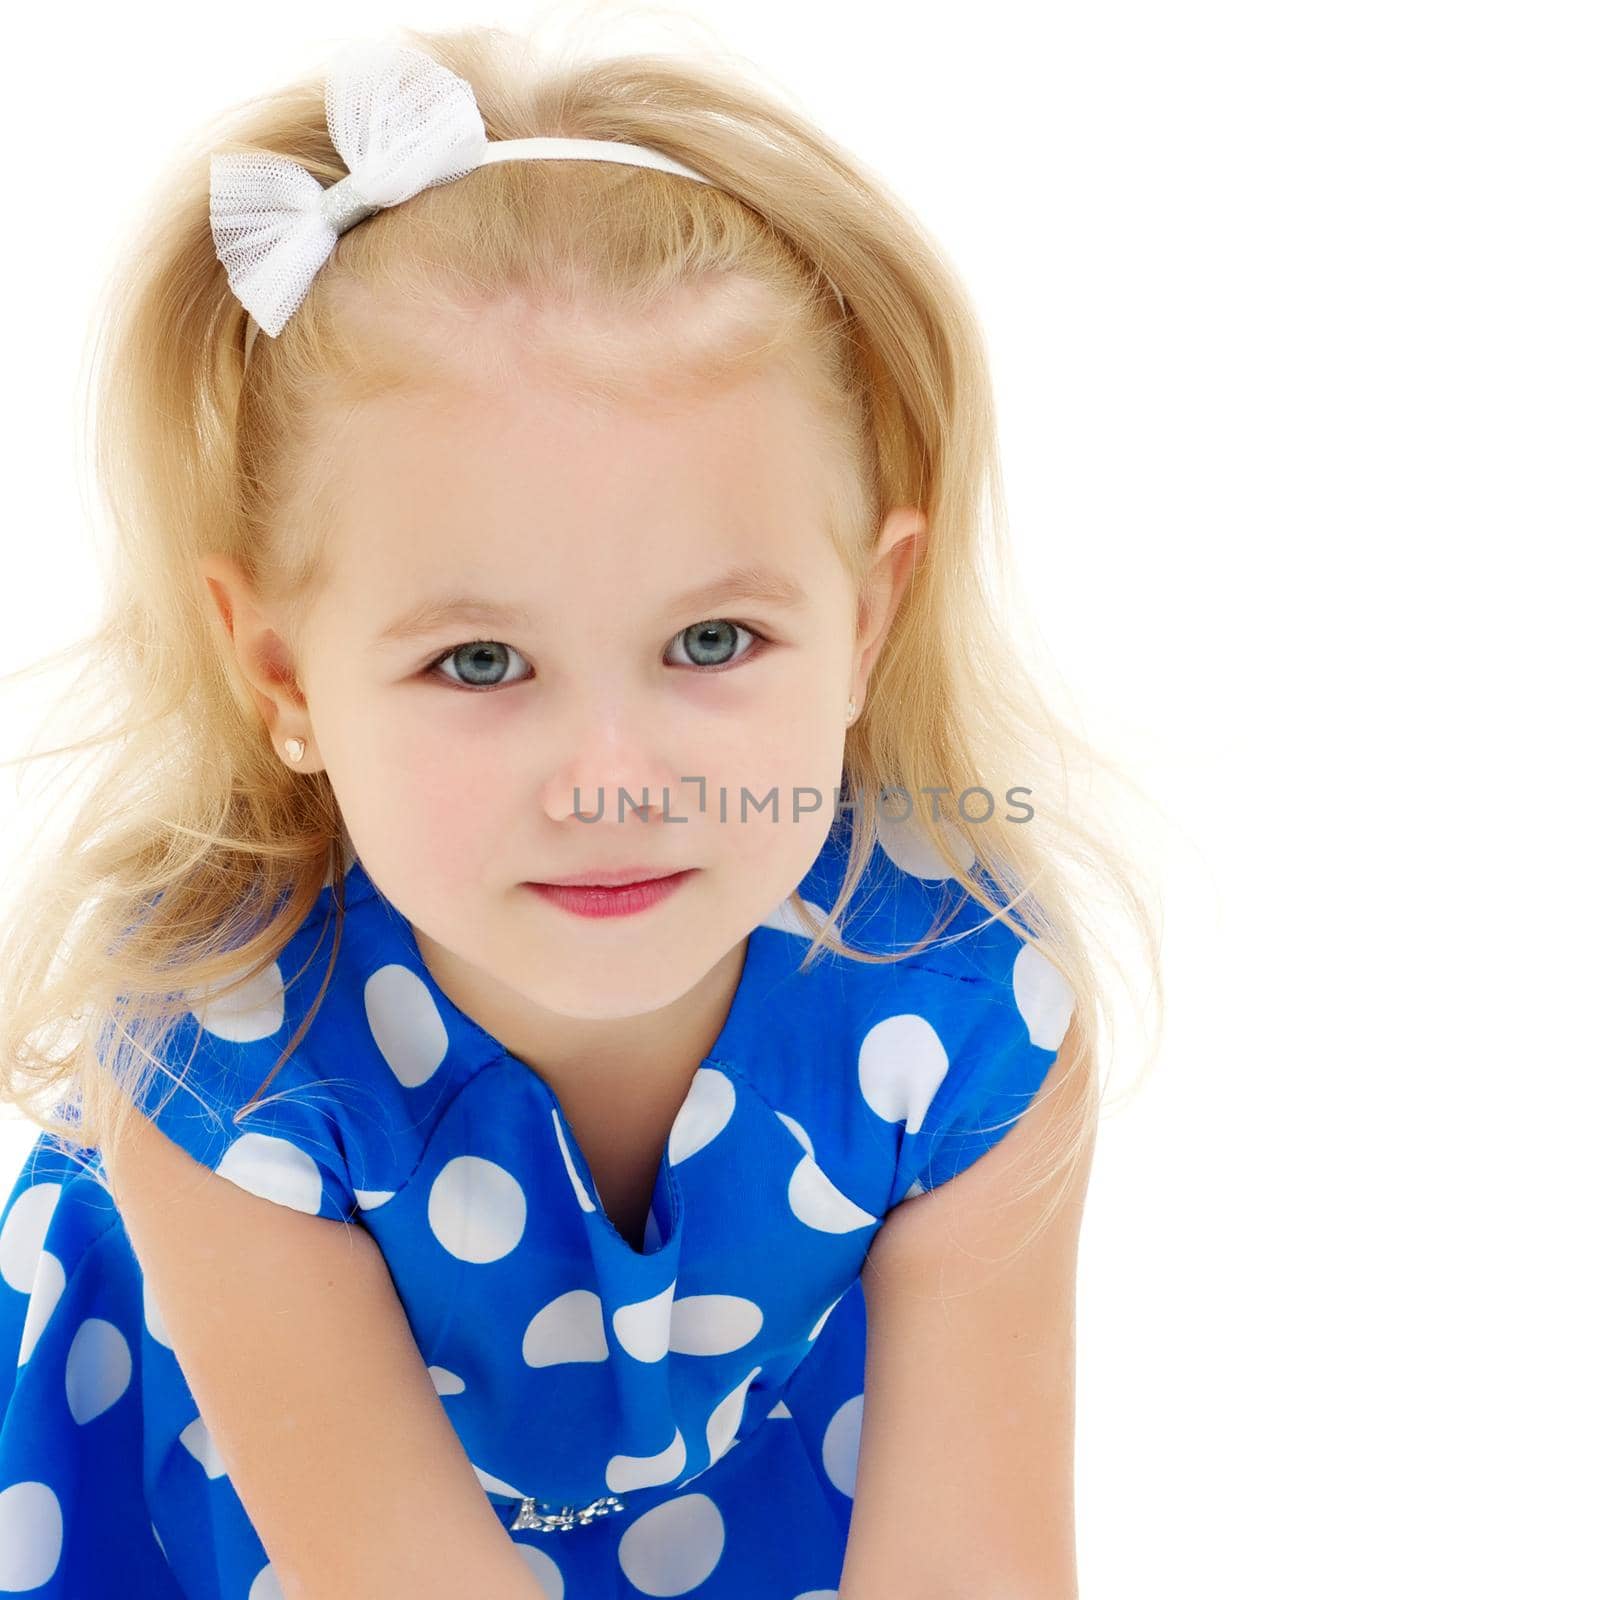 Beautiful little girl close-up. The concept of beauty and fashion, happy childhood. Isolated on white background.